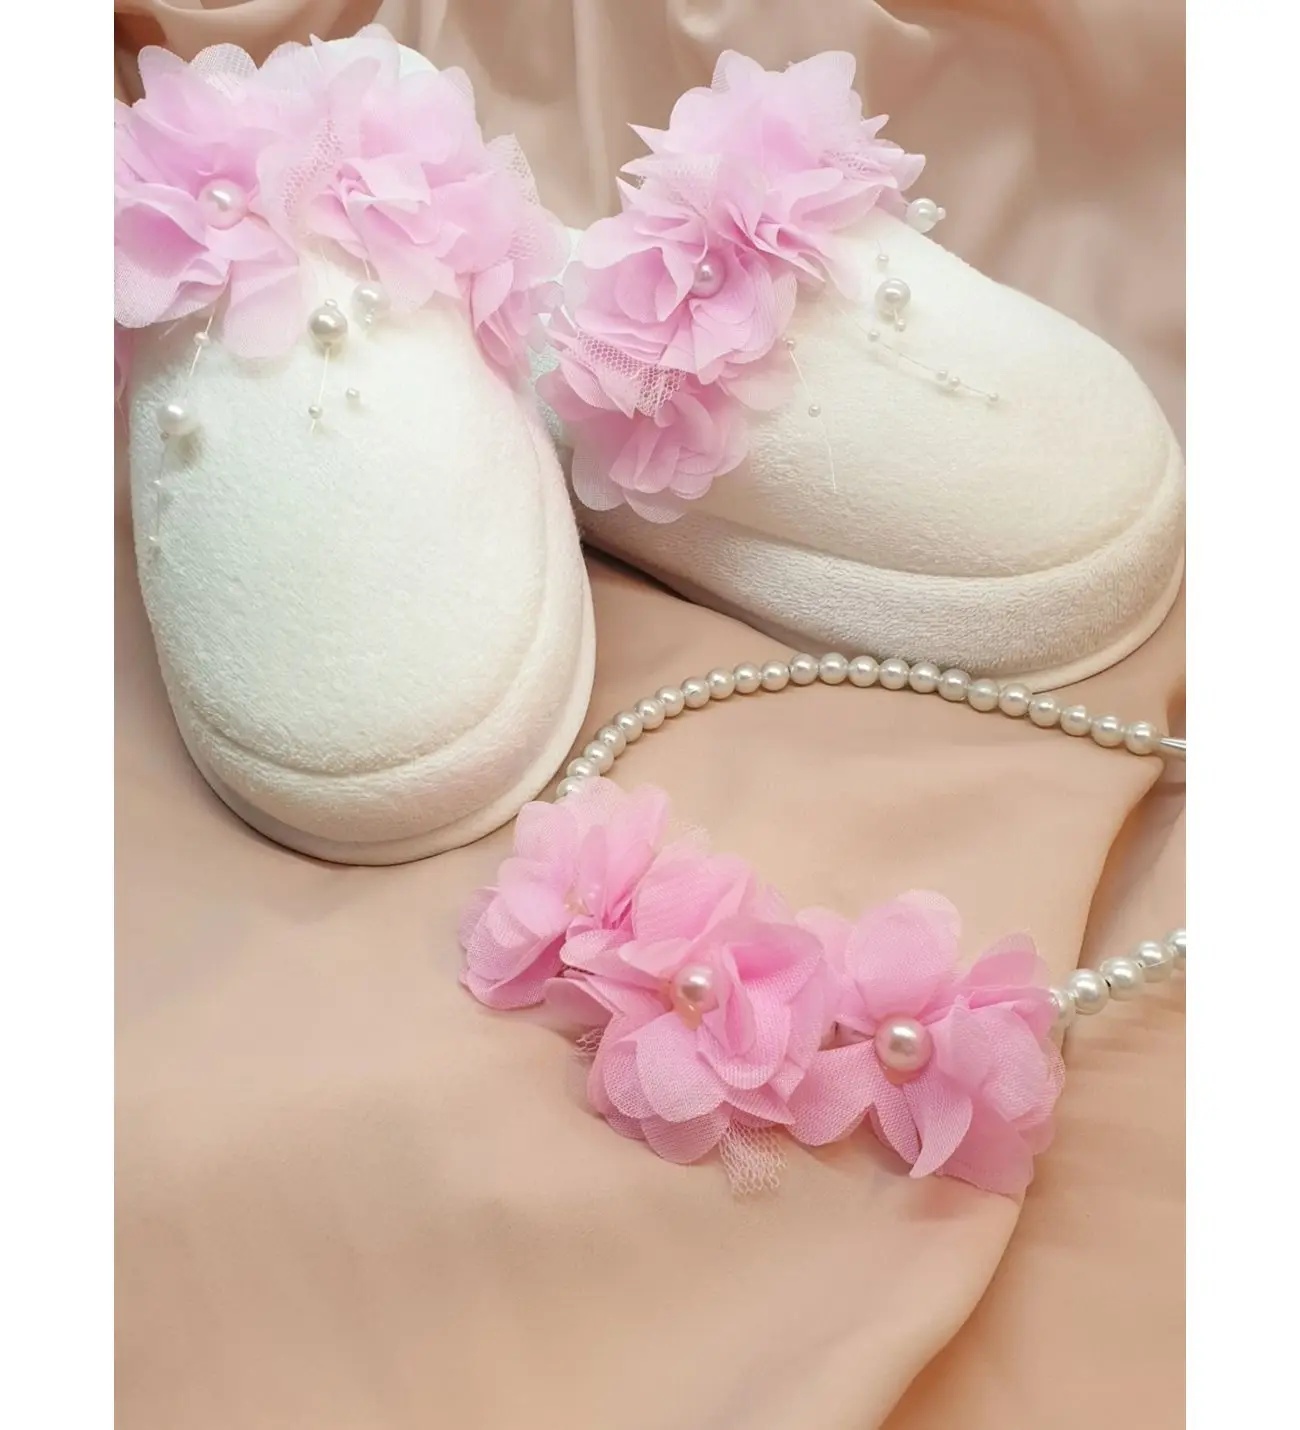 Floral Postpartum Slippers and Pearl Crown Set (Pair of 2), Gift for Mother, Spouse